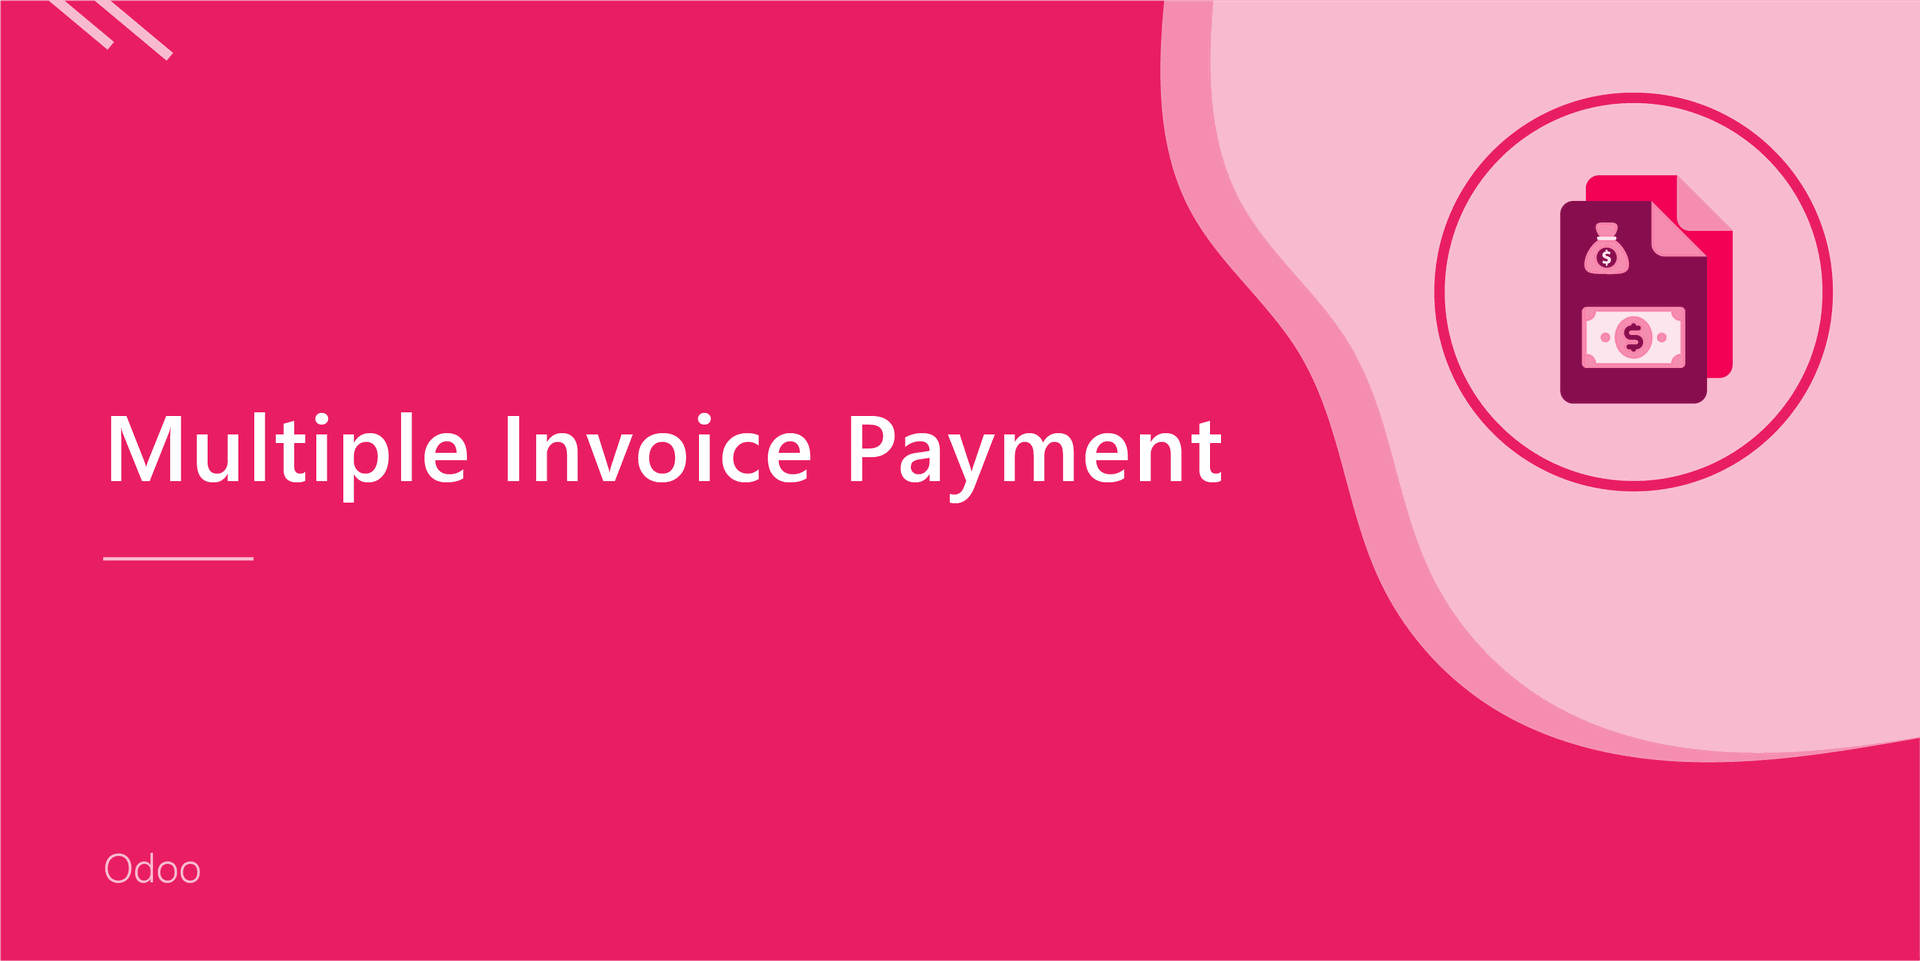 Multiple Invoice Payment